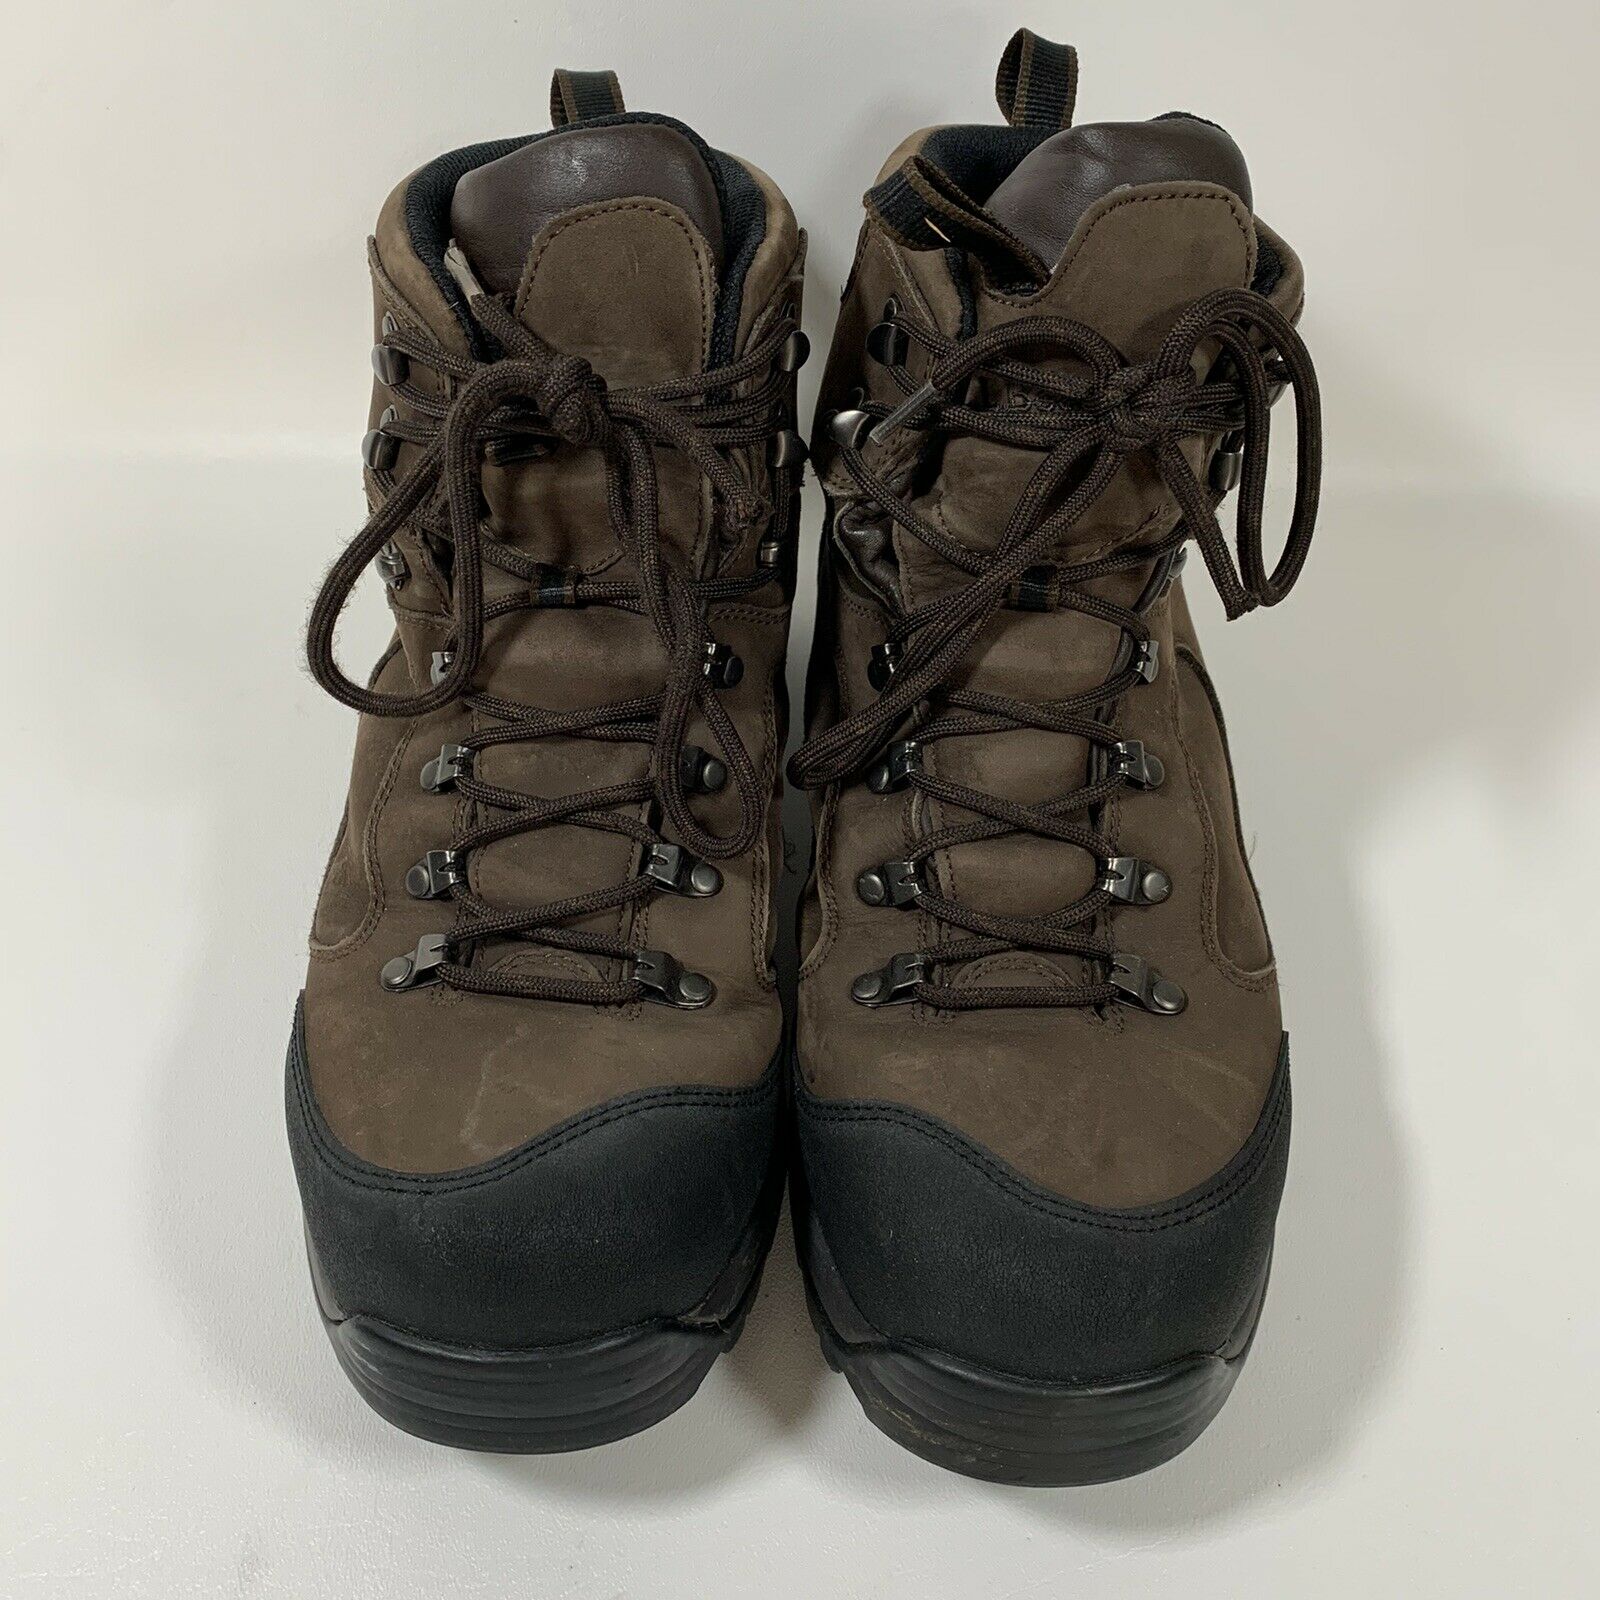 Men's LL Bean Gore-Tex Brown Leather Hiking Boots with Vibram Soles Size 12M